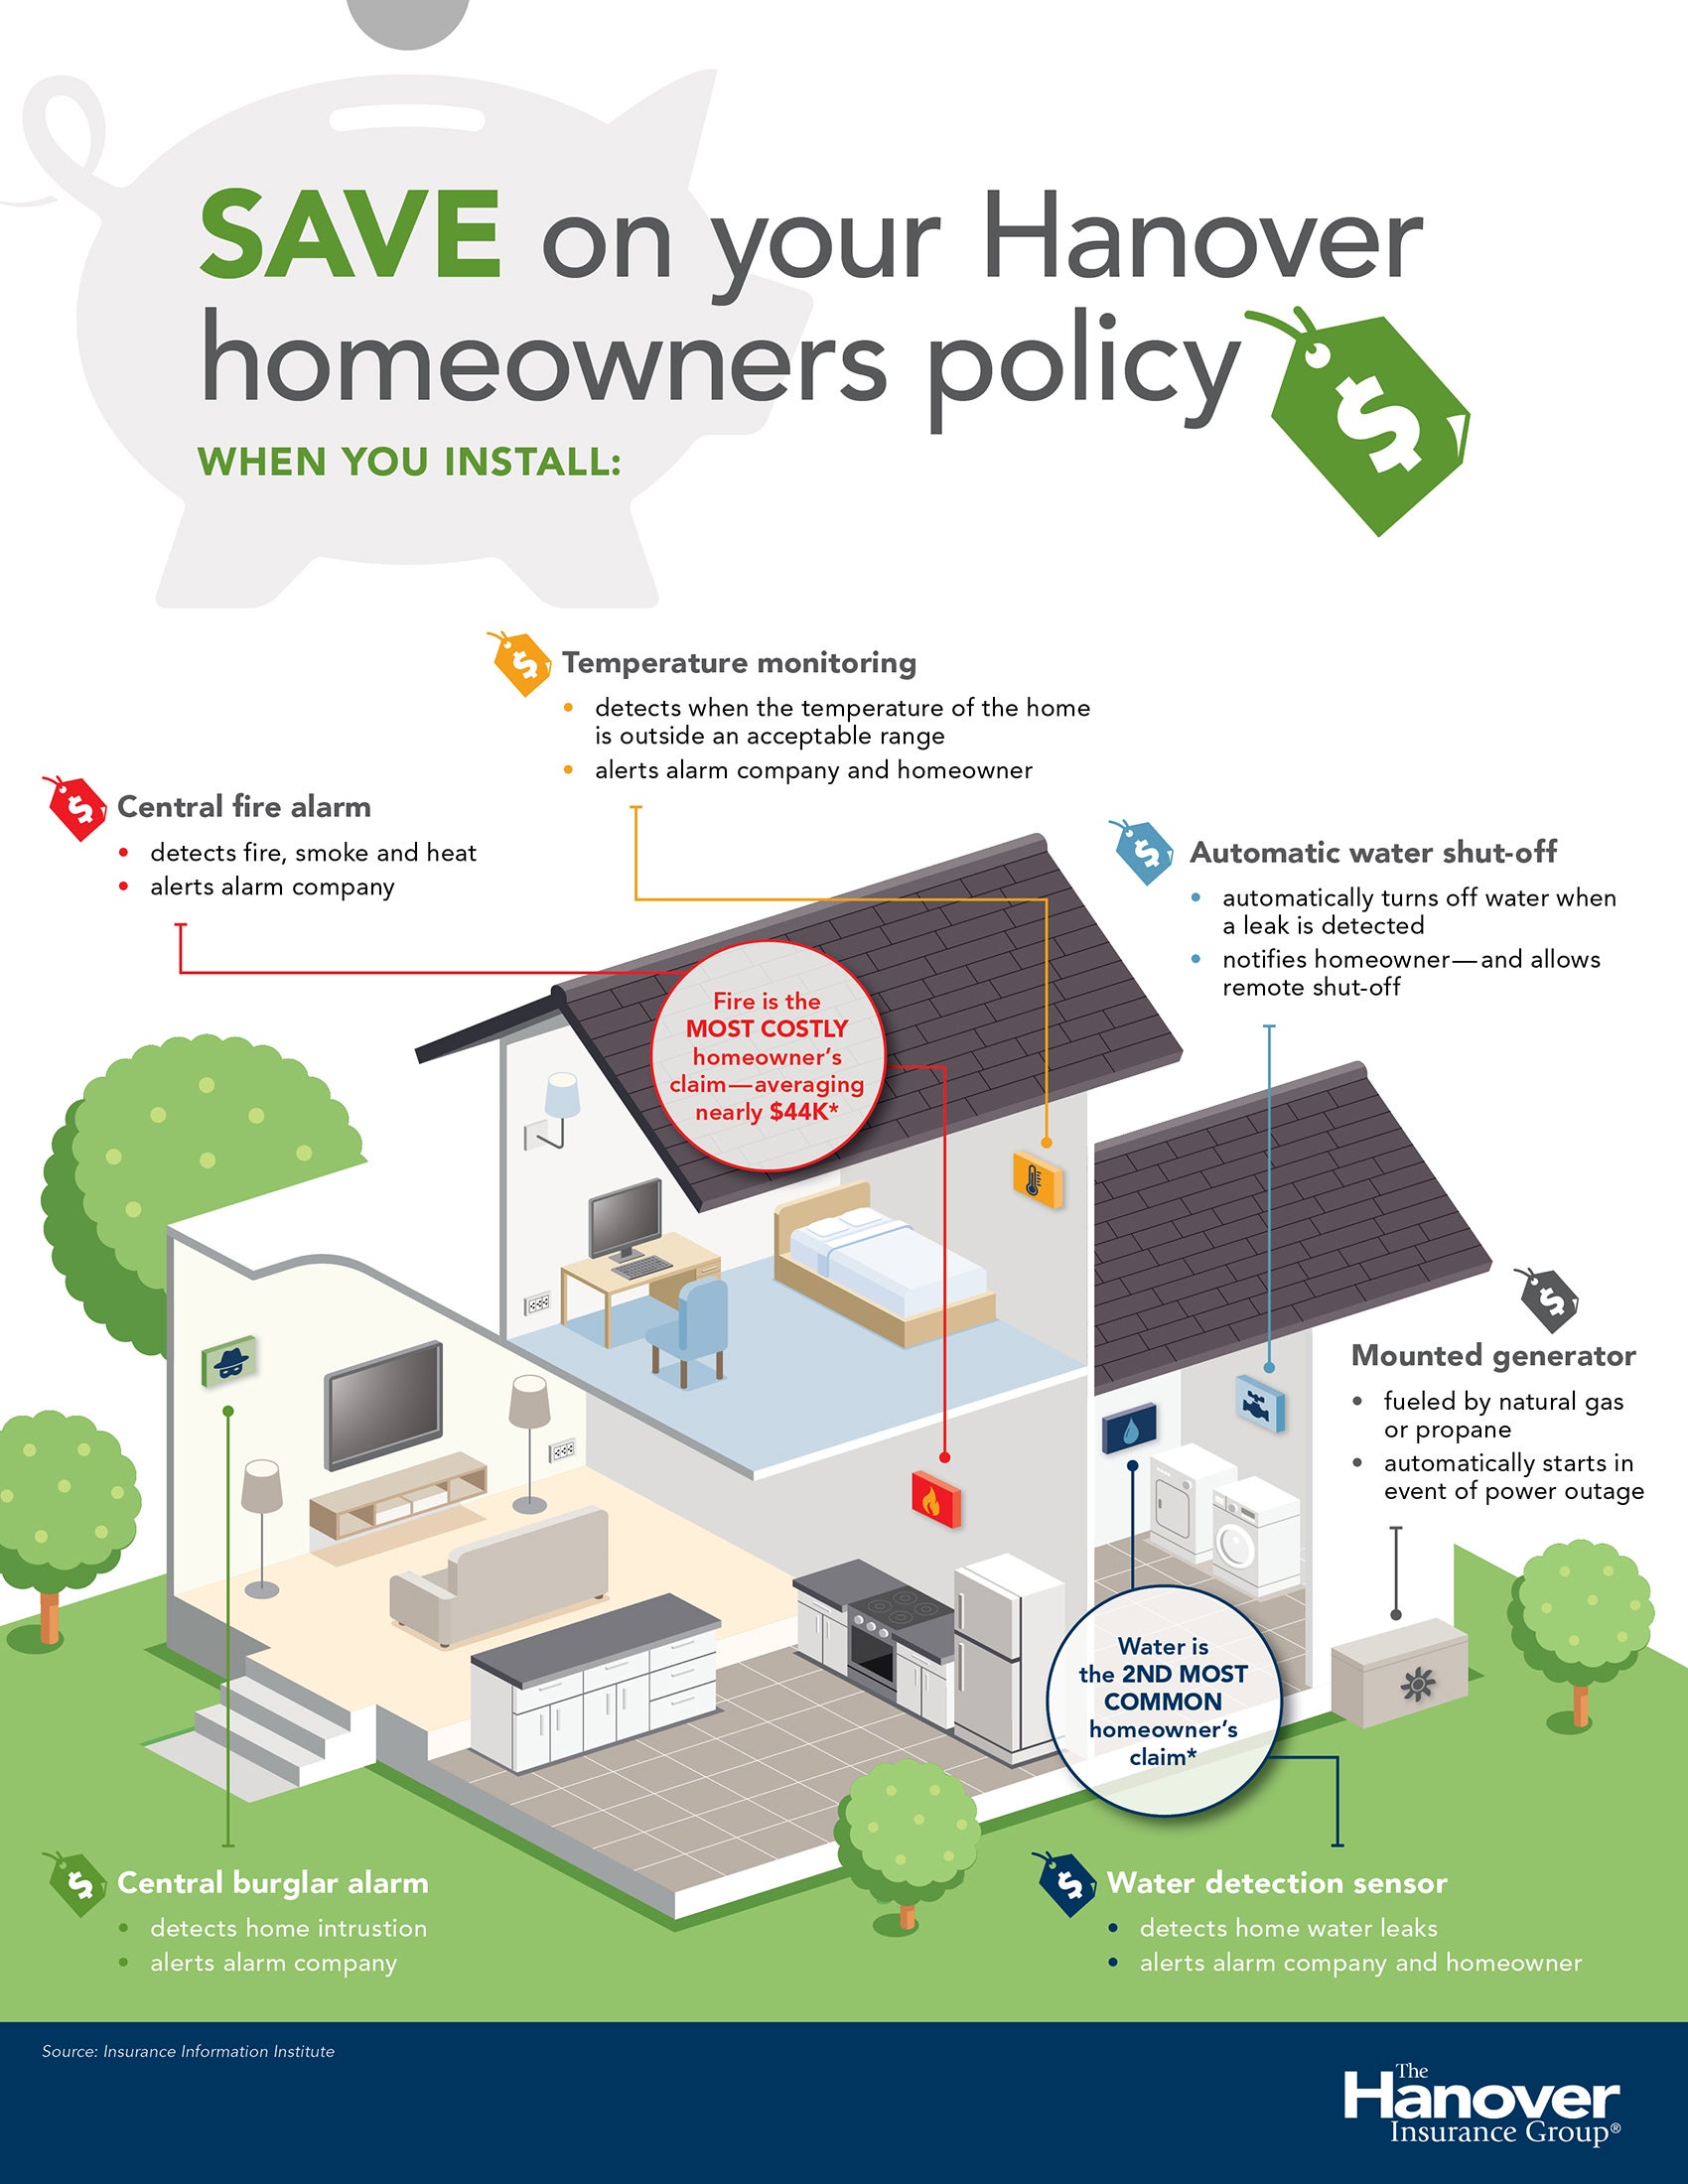 Infographic illustrating how the installation of home safety devices can save homeowners money on their insurance with The Hanover